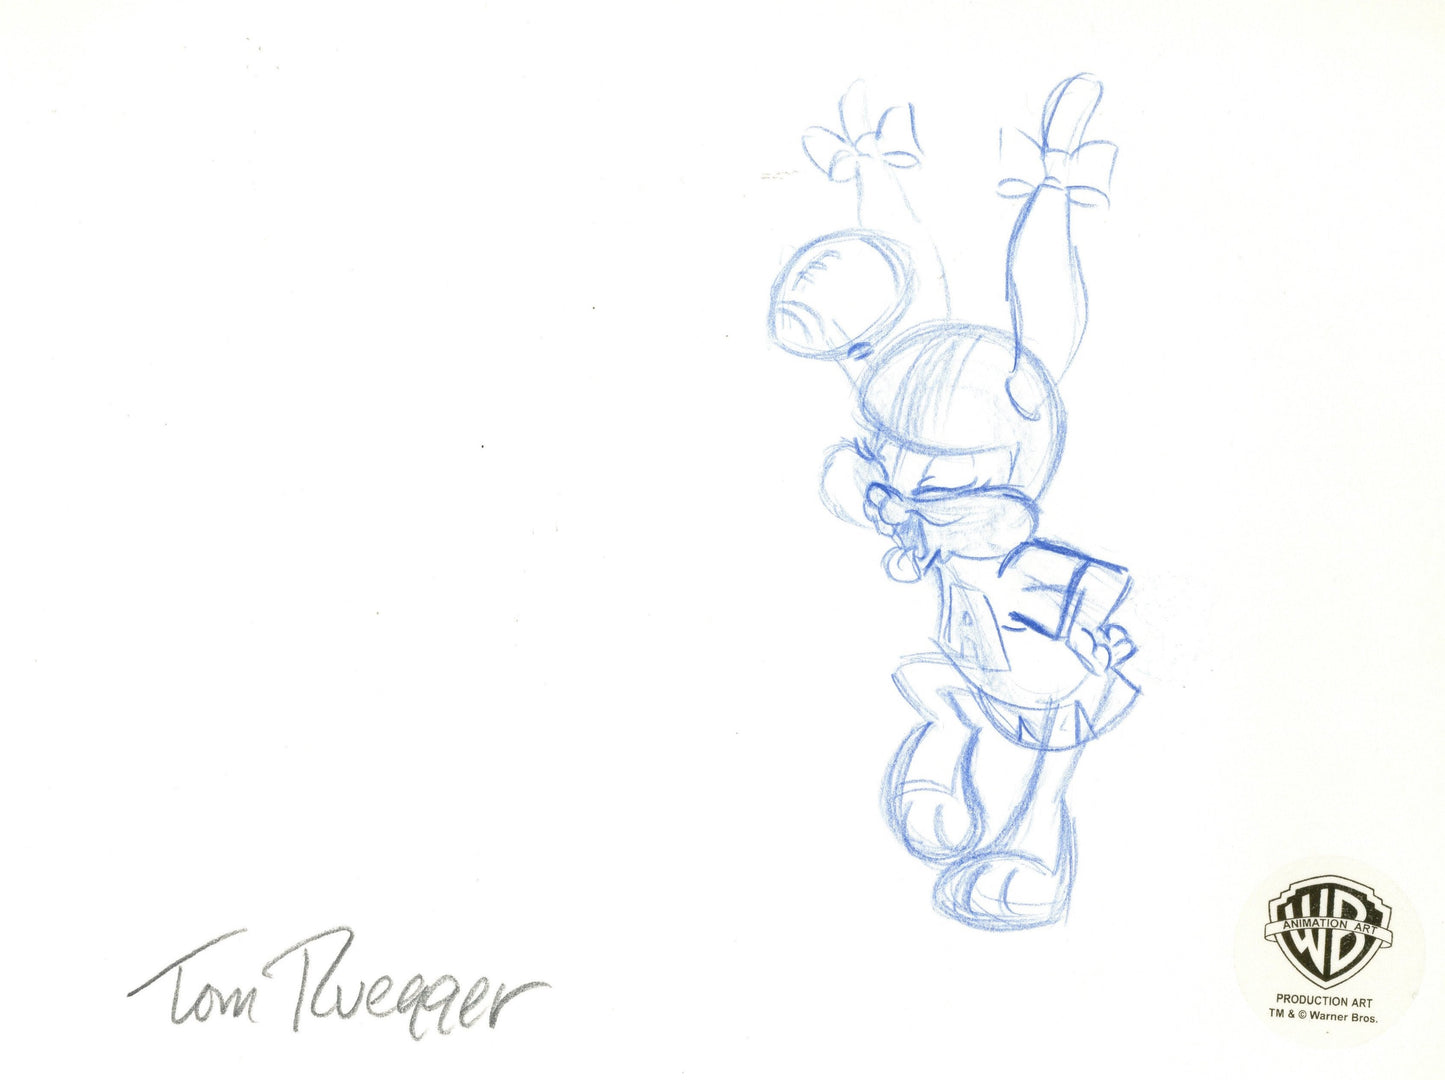 Tiny Toons Original Production Drawing Signed by Tom Ruegger: Babs Bunny